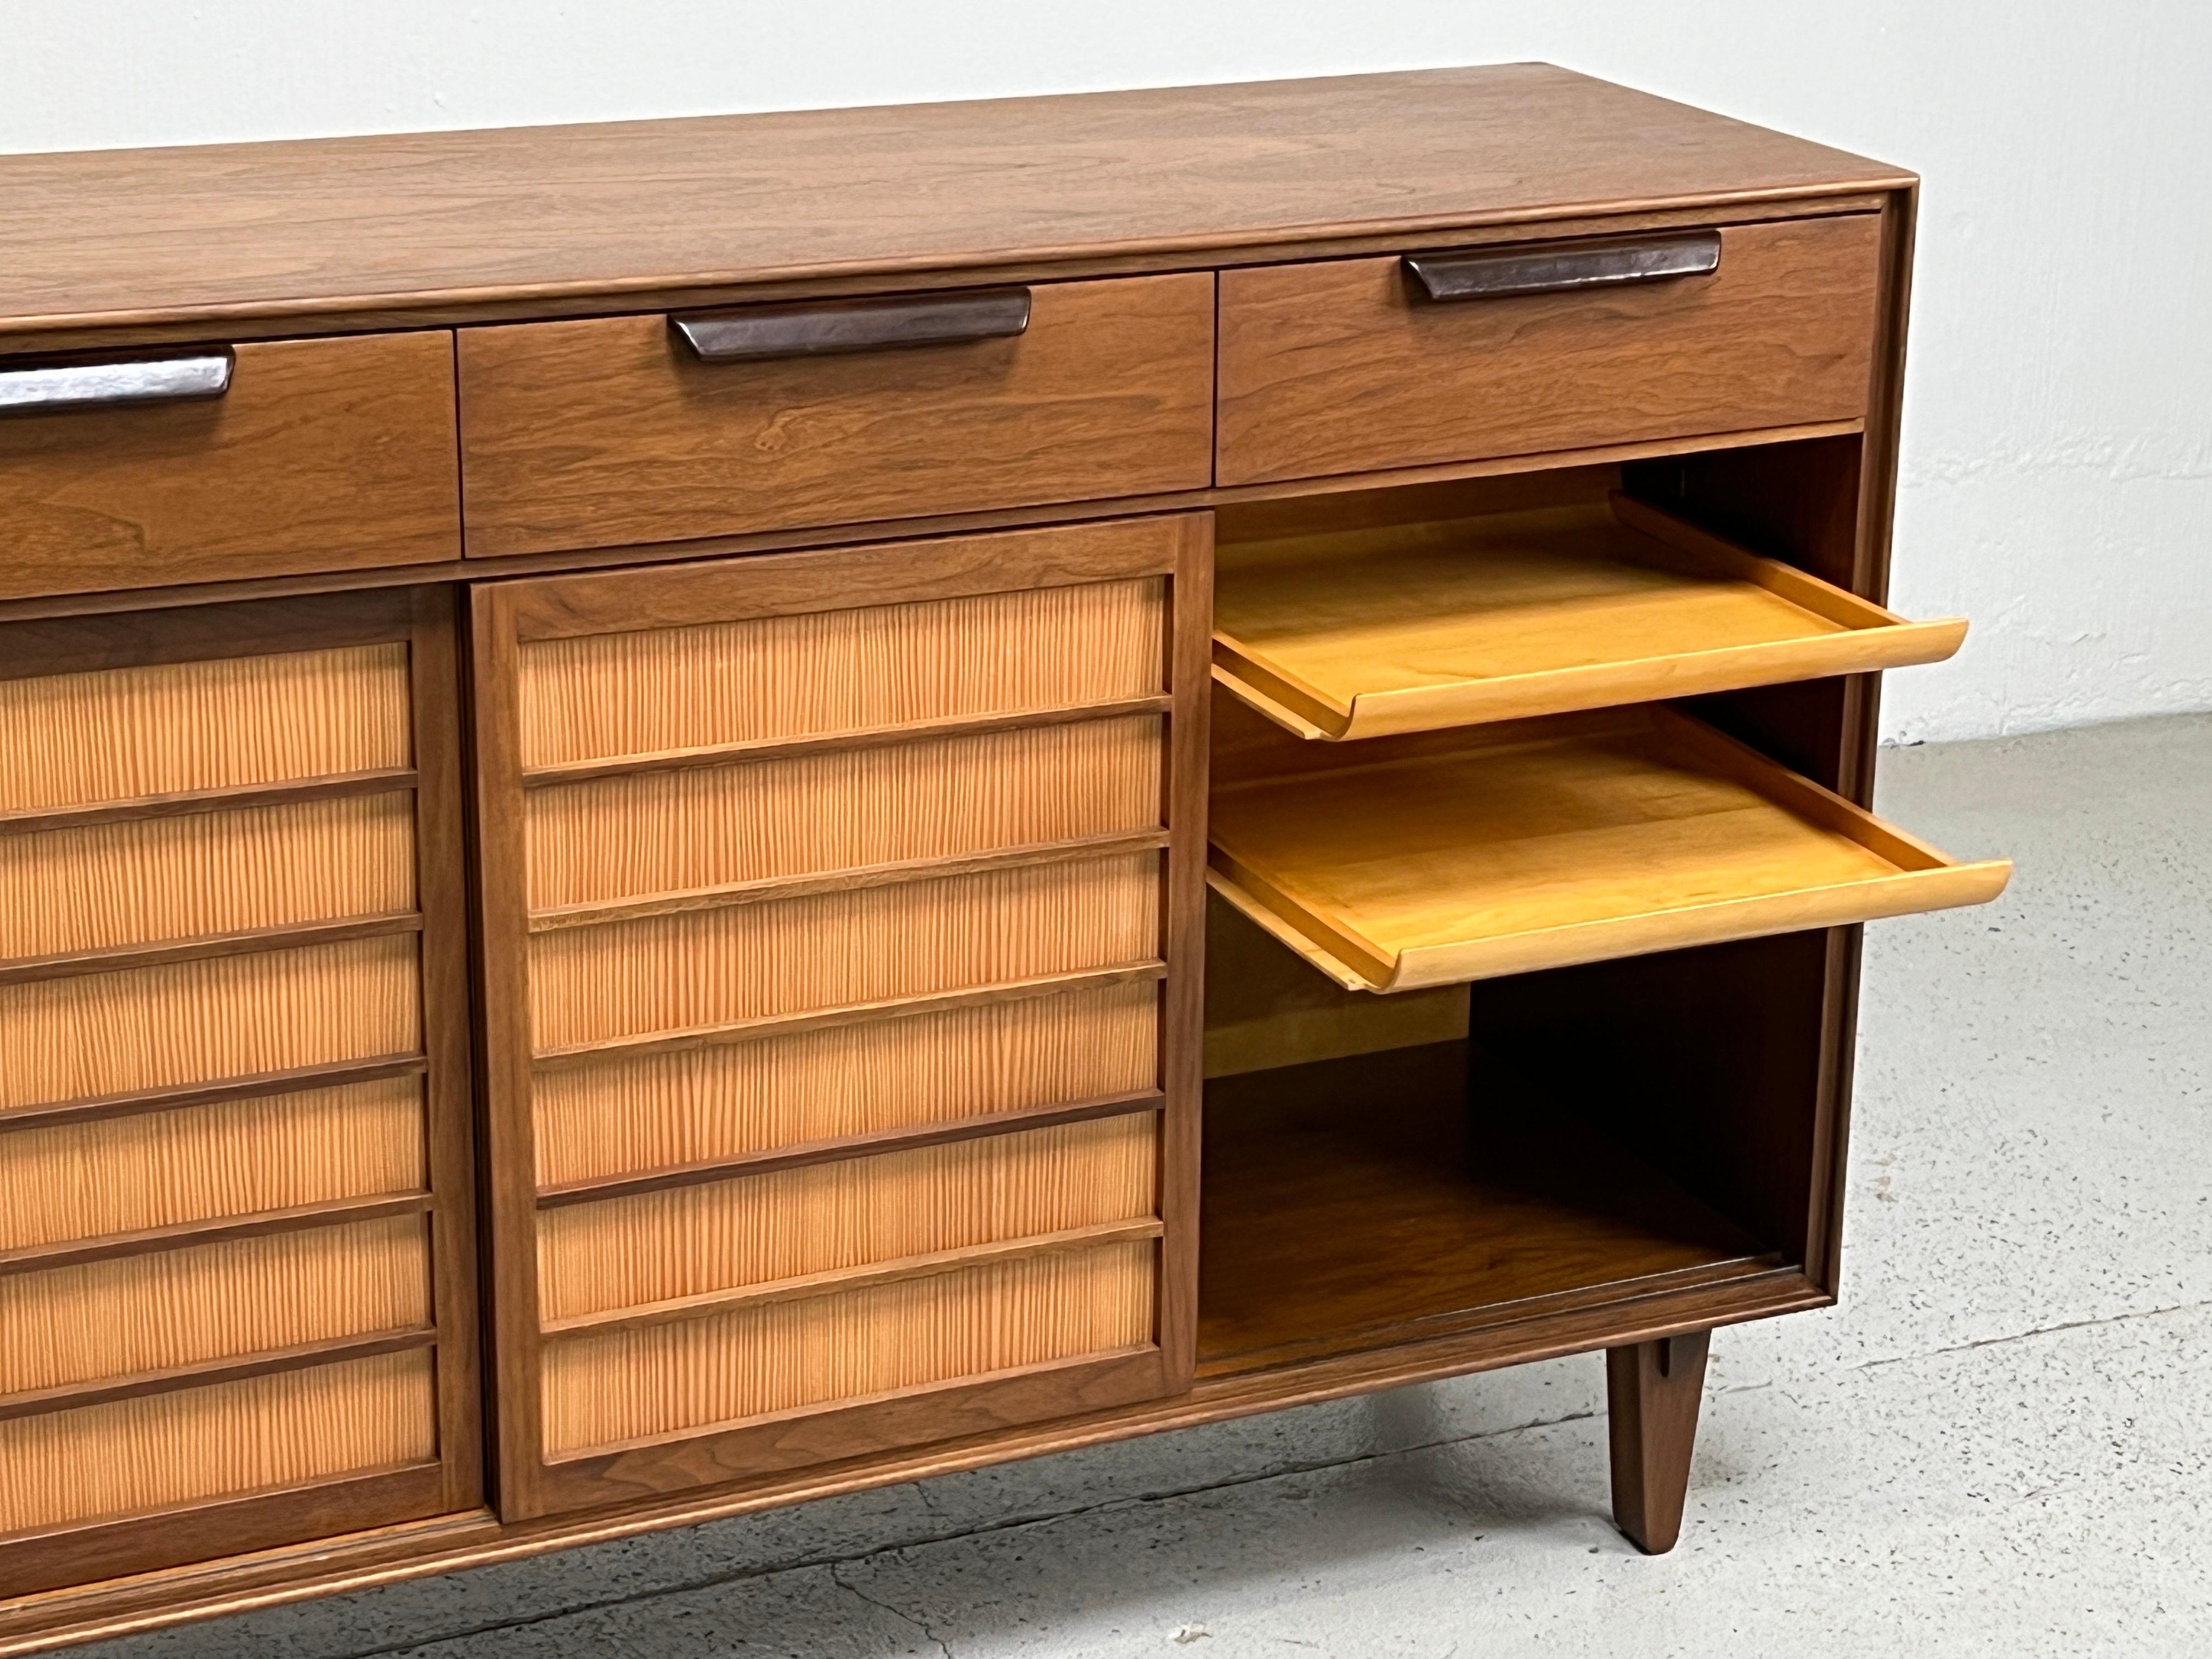 A walnut cabinet with leather wrapped handles and spruce sliding doors. Designed by Edward Wormley for Dunbar.